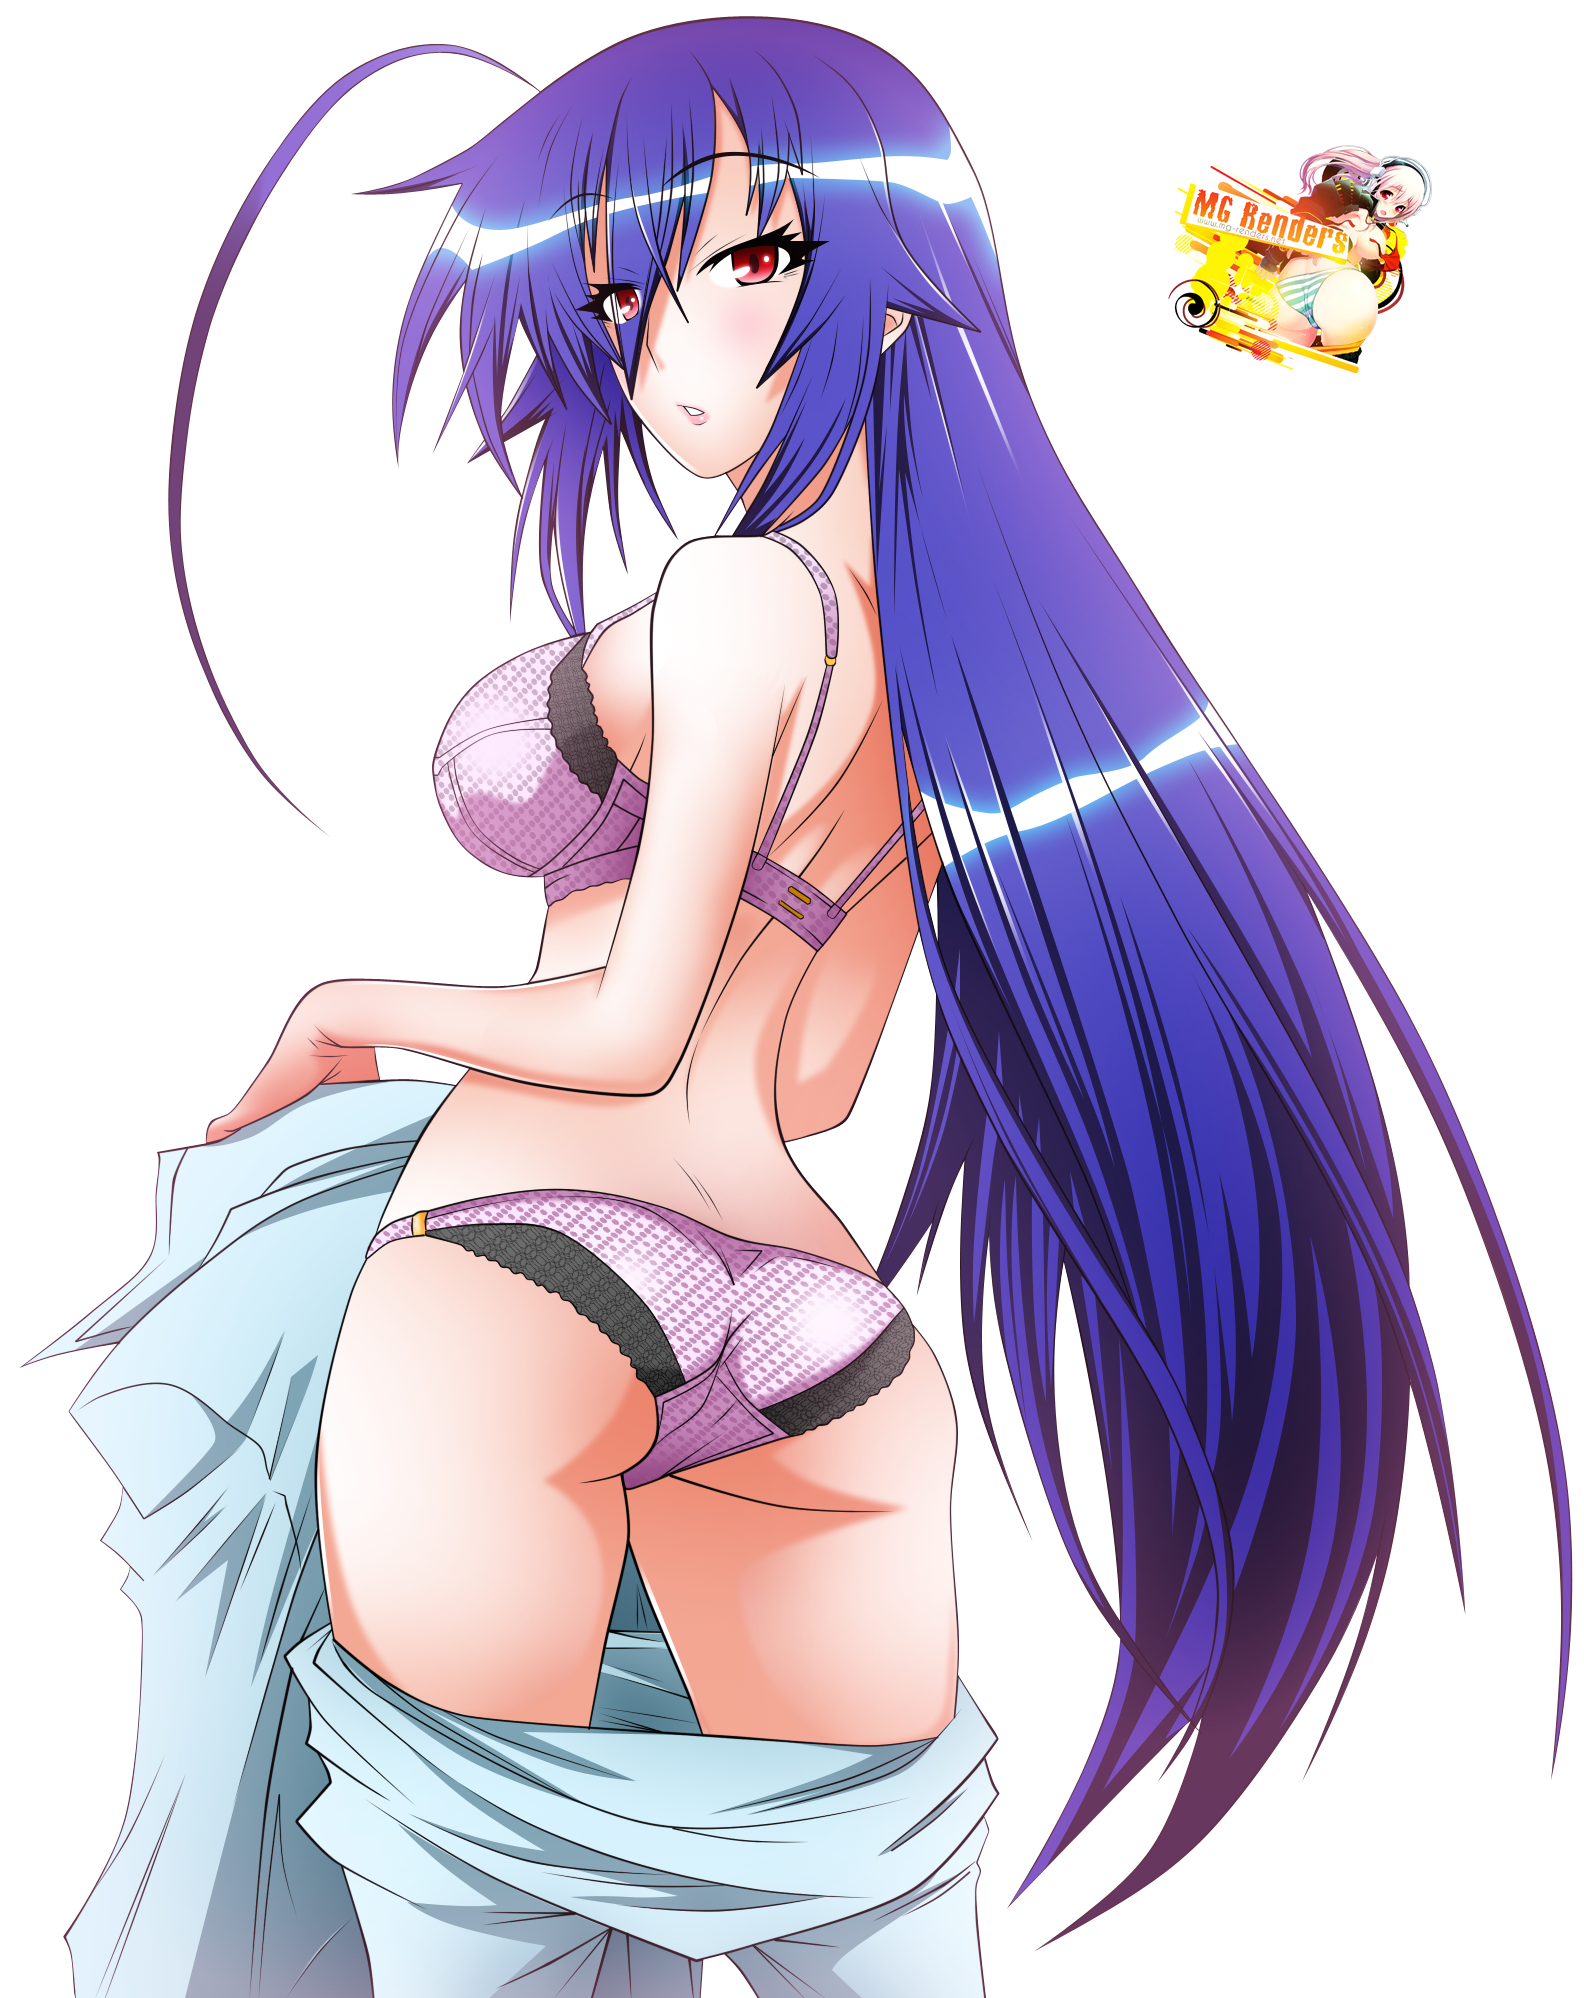 1584px x 1998px - Download Sex Pics Showing Xxx Images For Medaka Box Lesbian ...